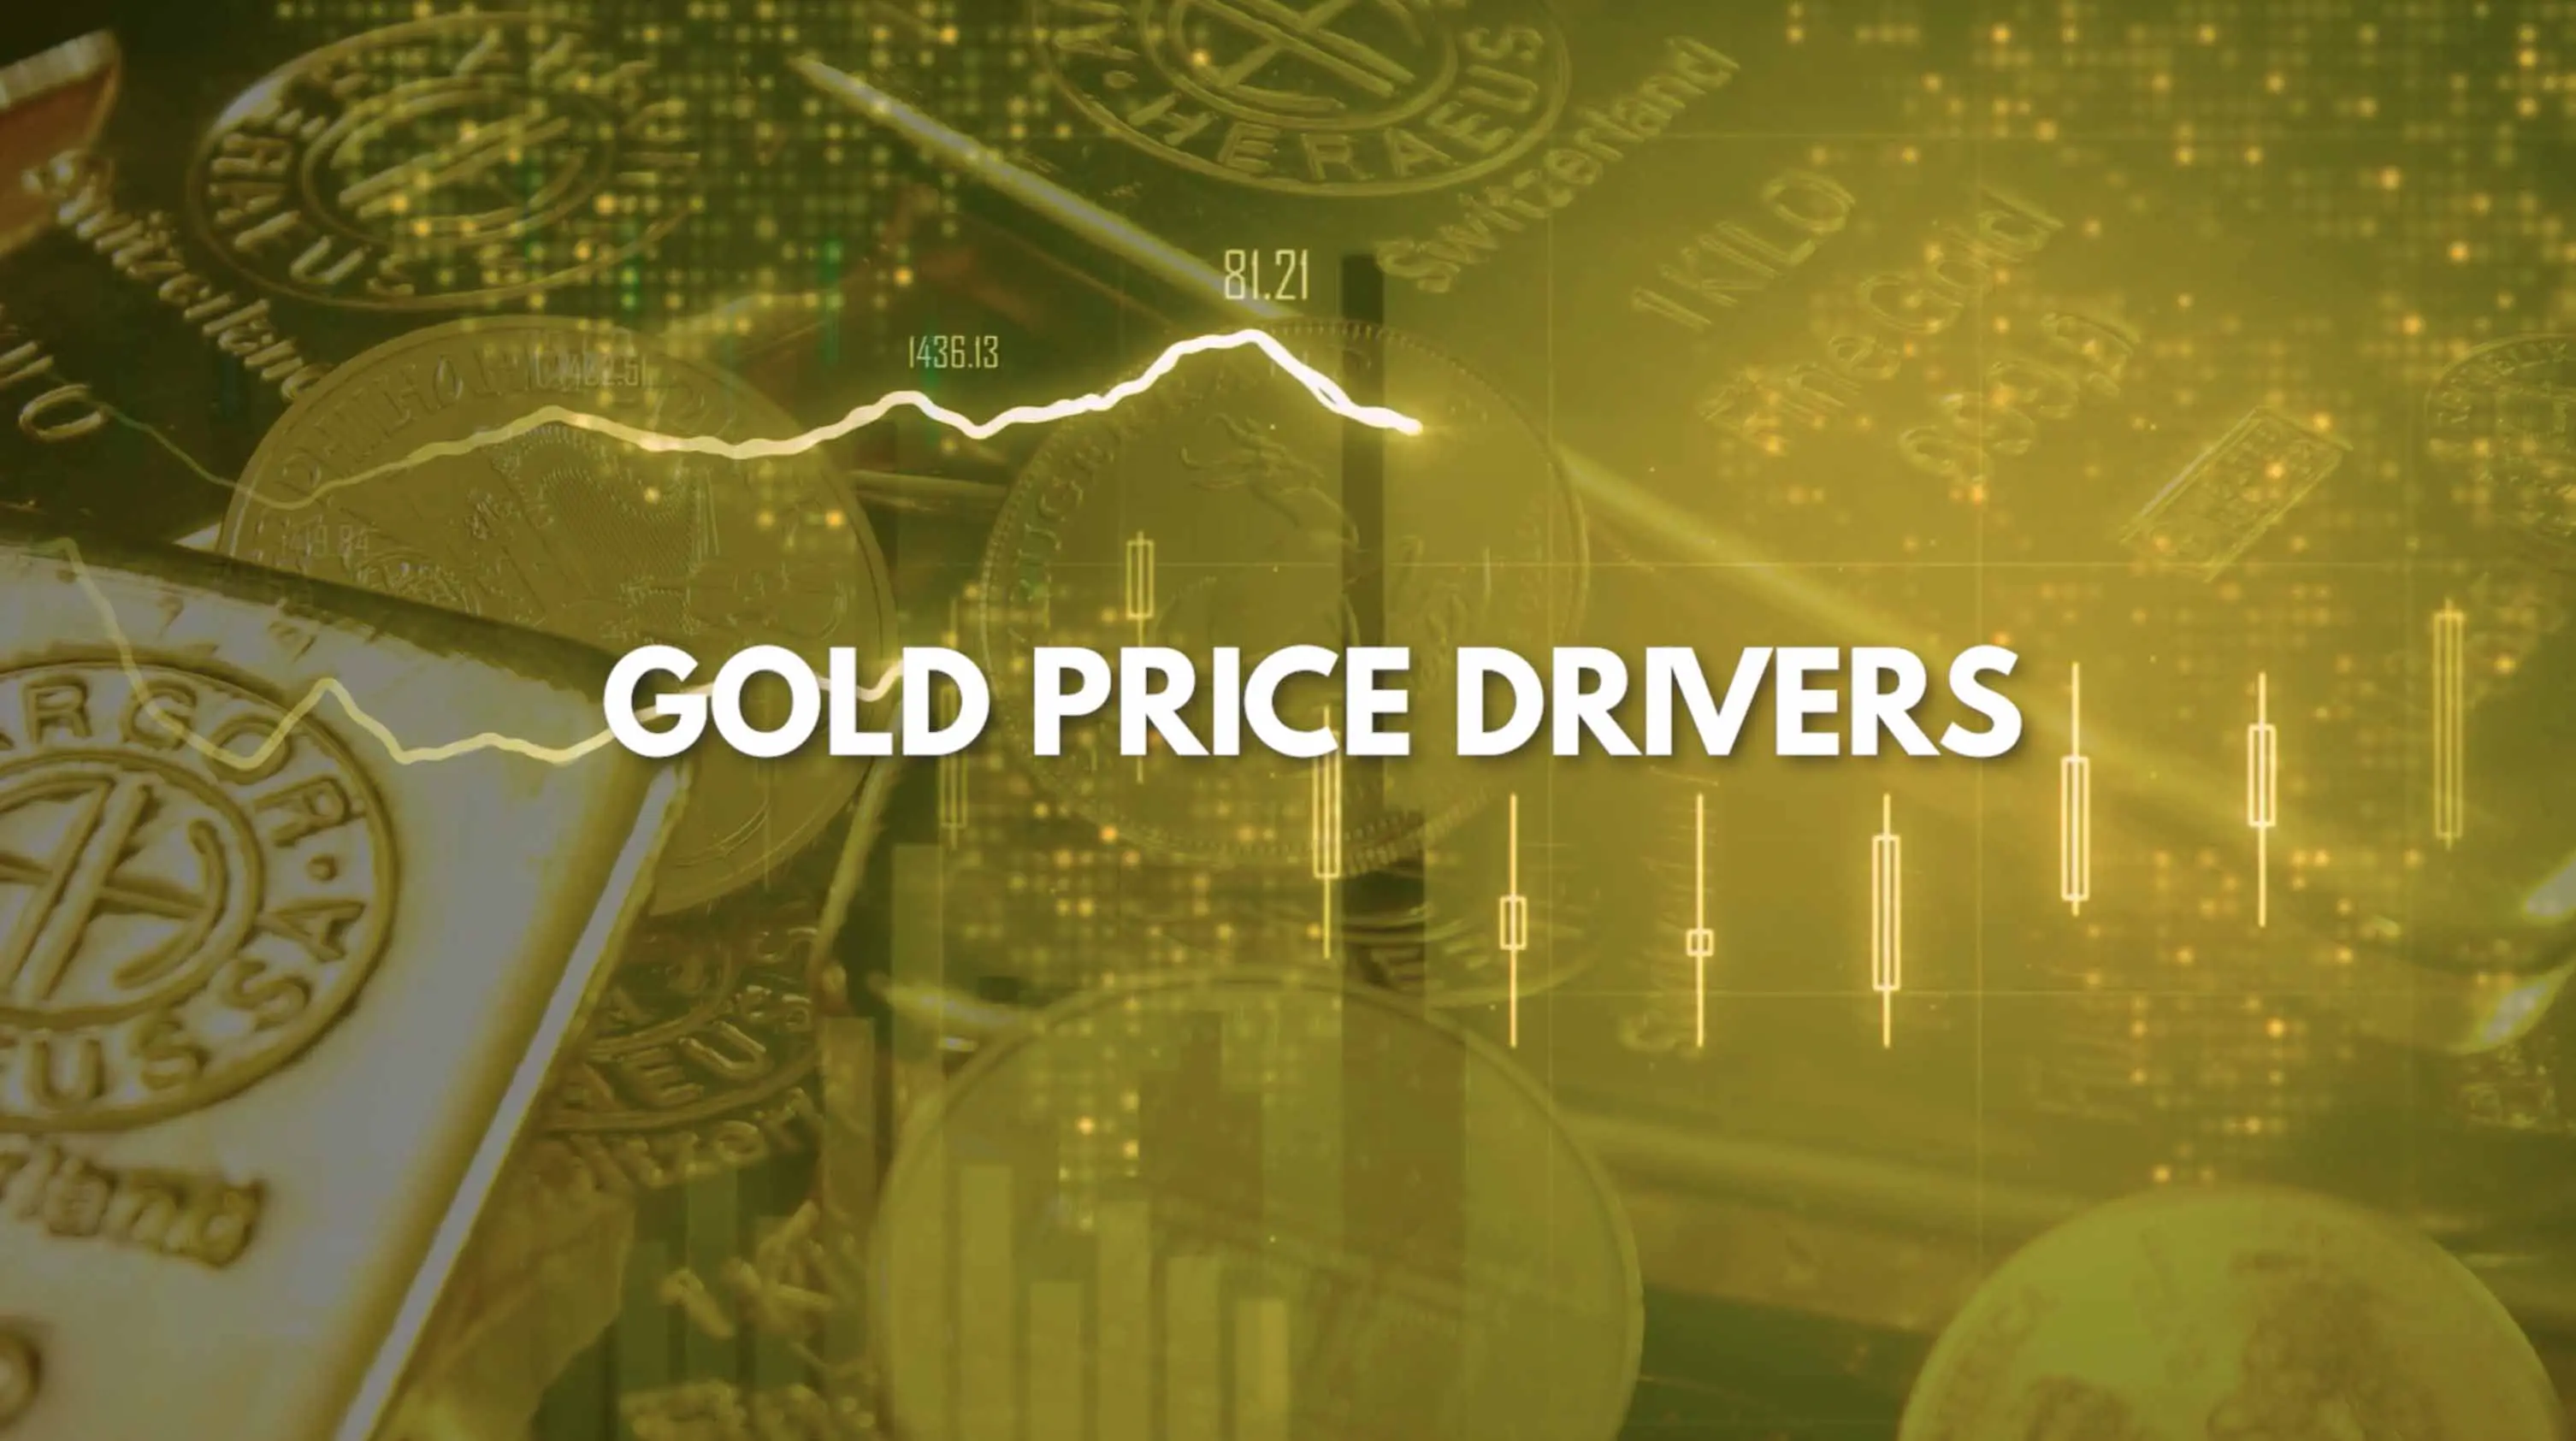 Gold Price Drivers